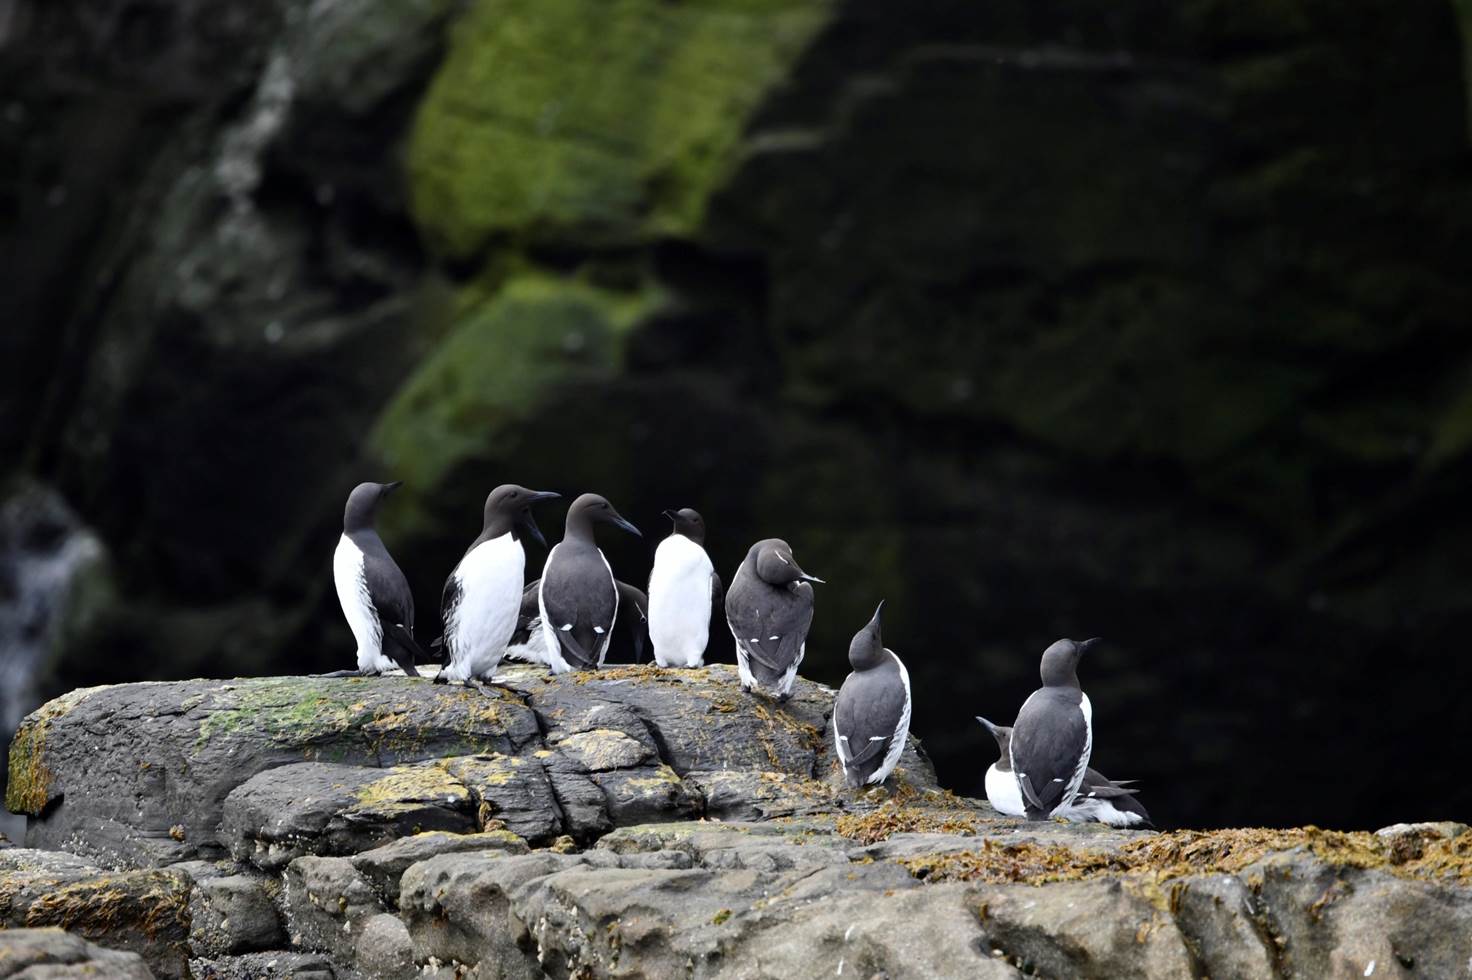 A group of penguins on a rock

Description automatically generated